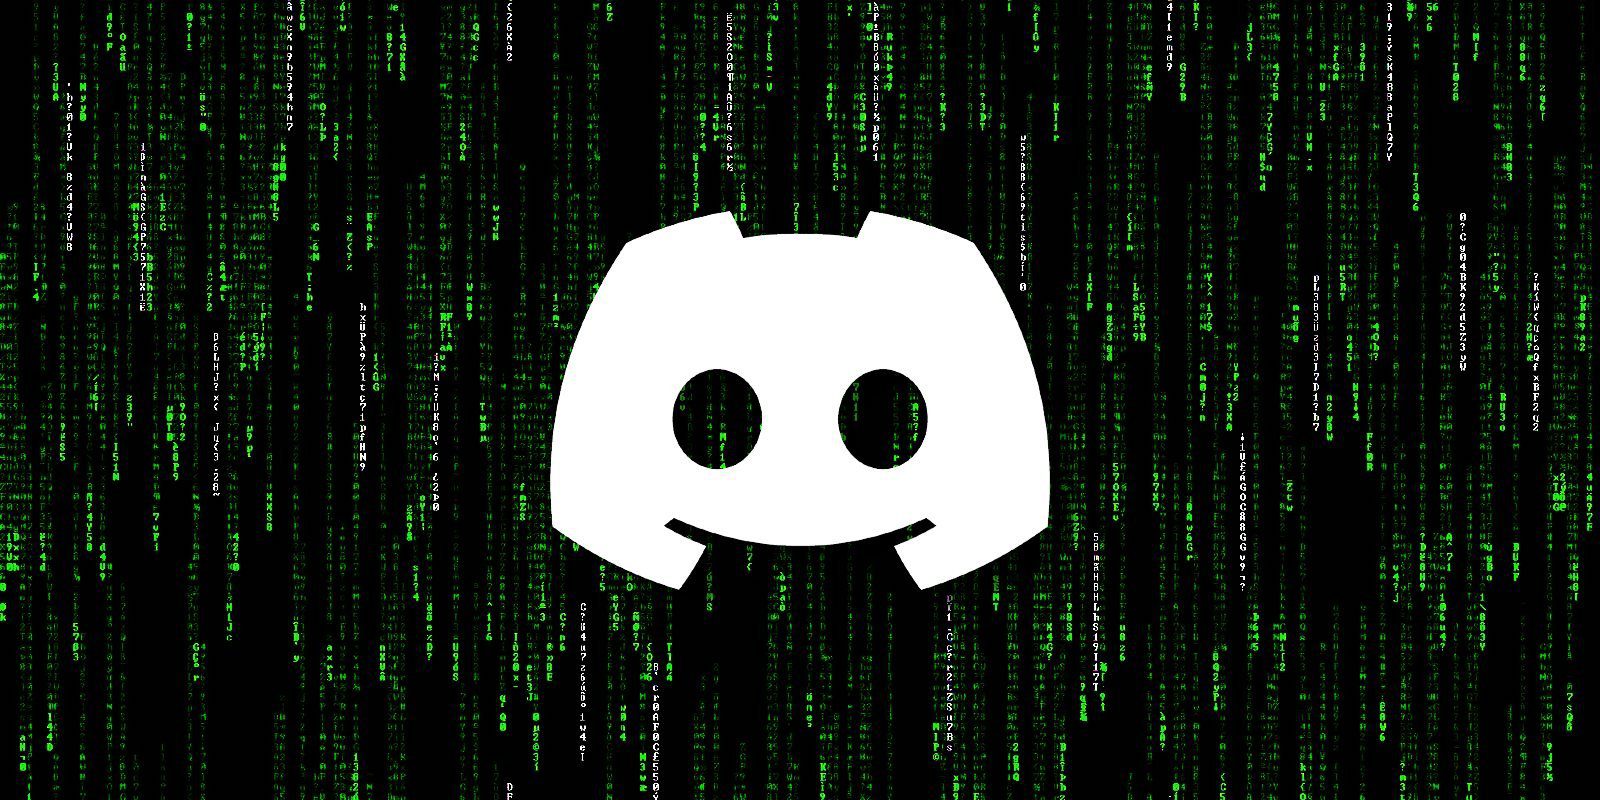 Discord discloses data breach after support agent got hacked – Source: www.bleepingcomputer.com